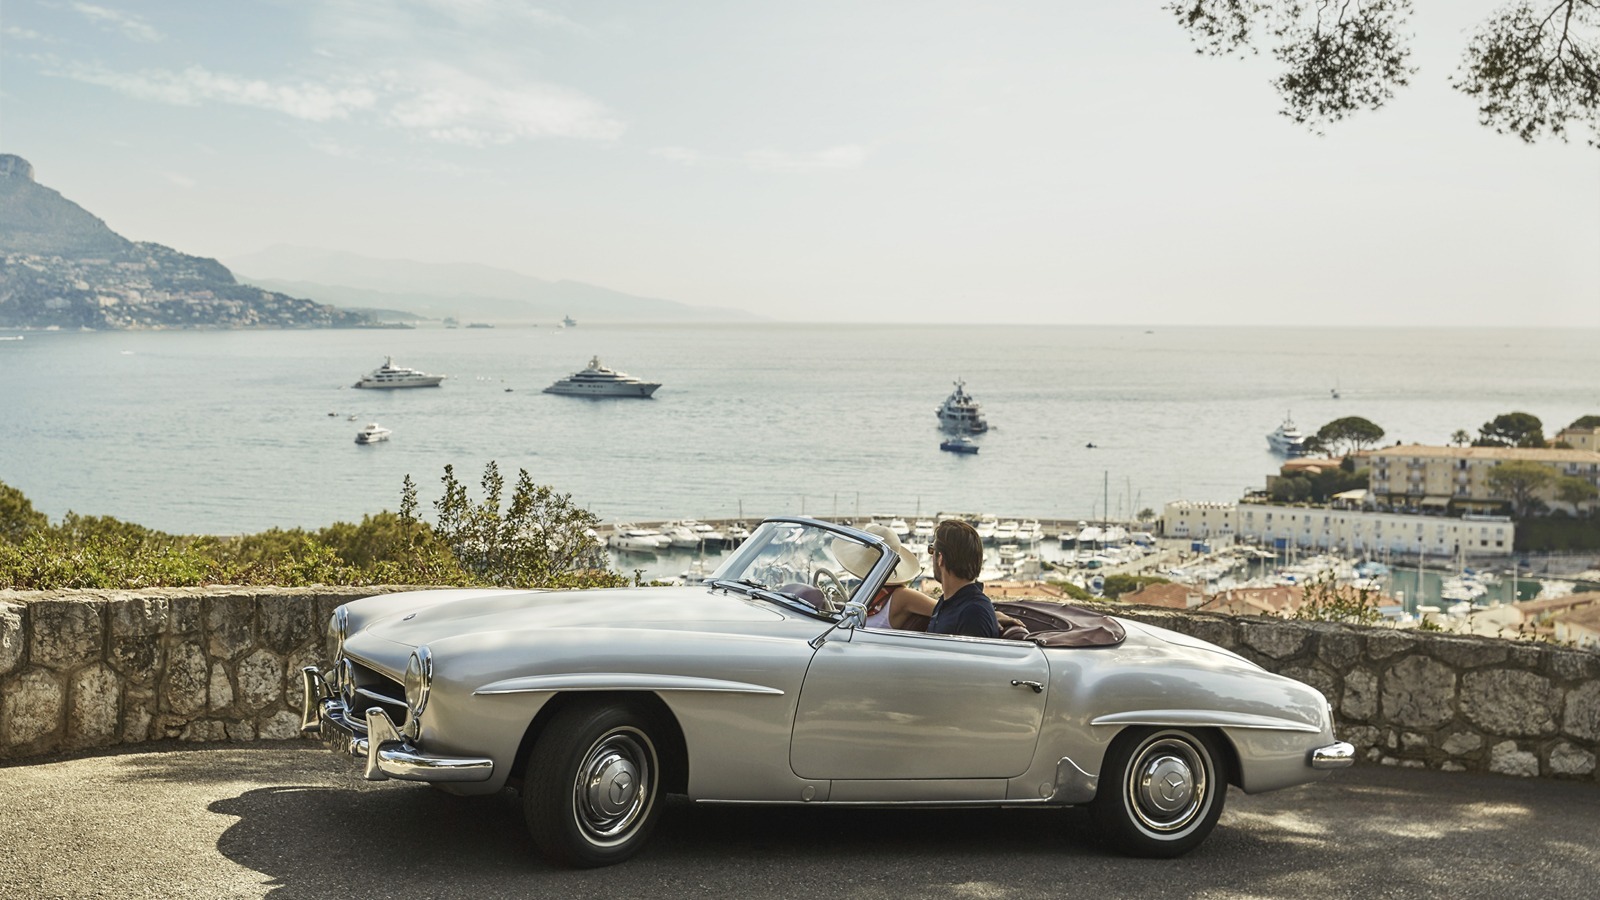 rent a classic car on the riviera: one of the five most romantic things to do in france